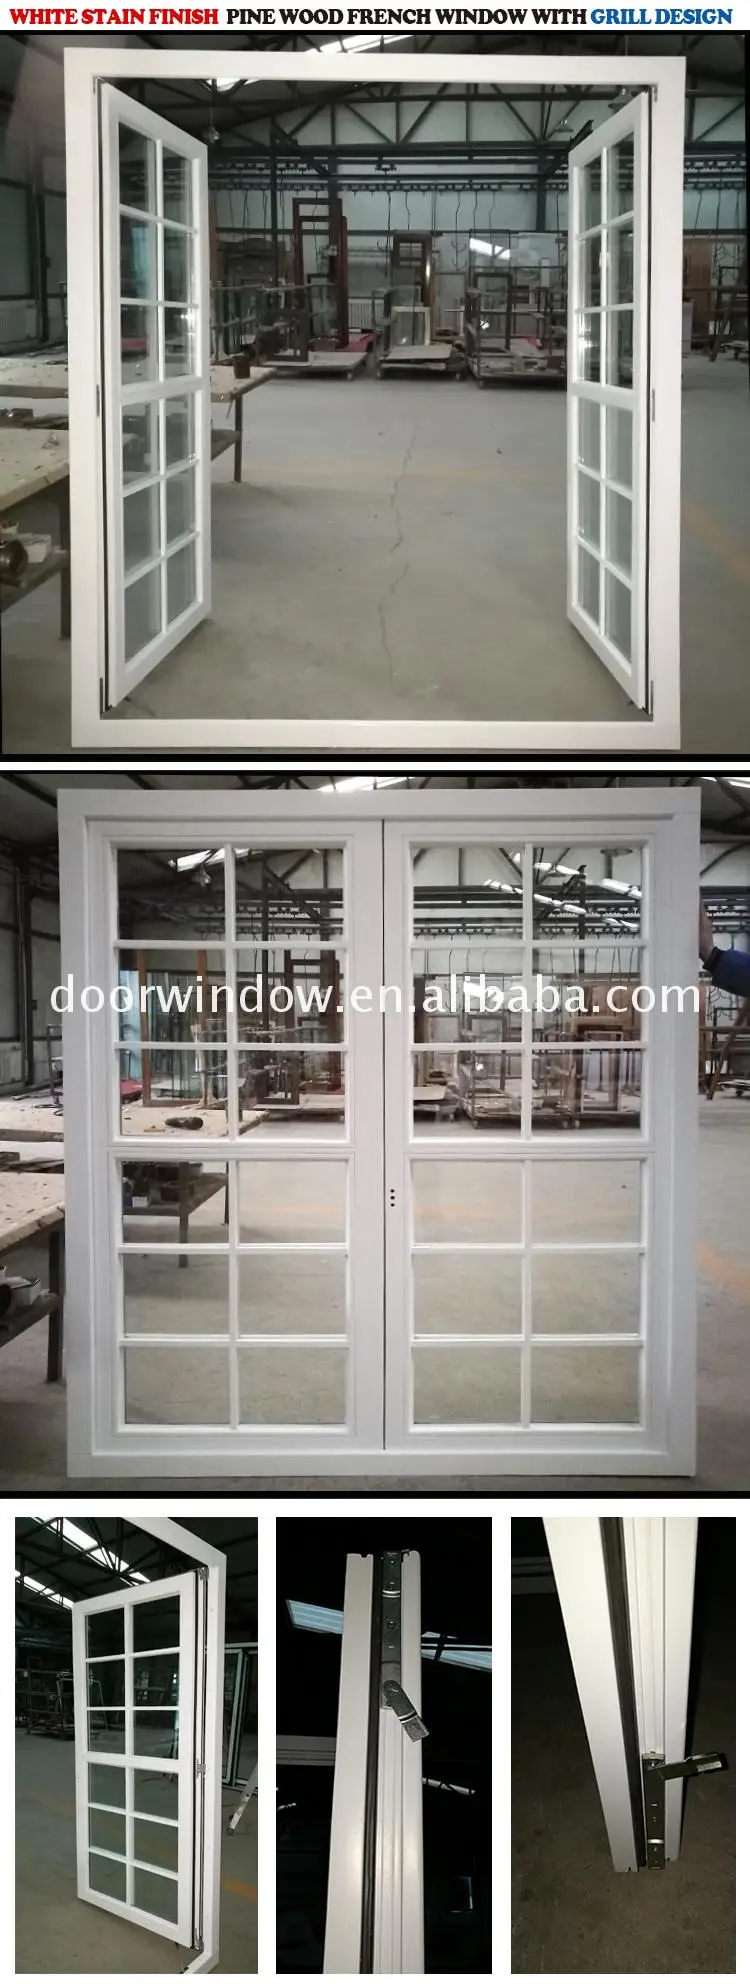 white stain pine timber wooden window with grill design Aluminum Hurricane Proof Impact Resistant Windows